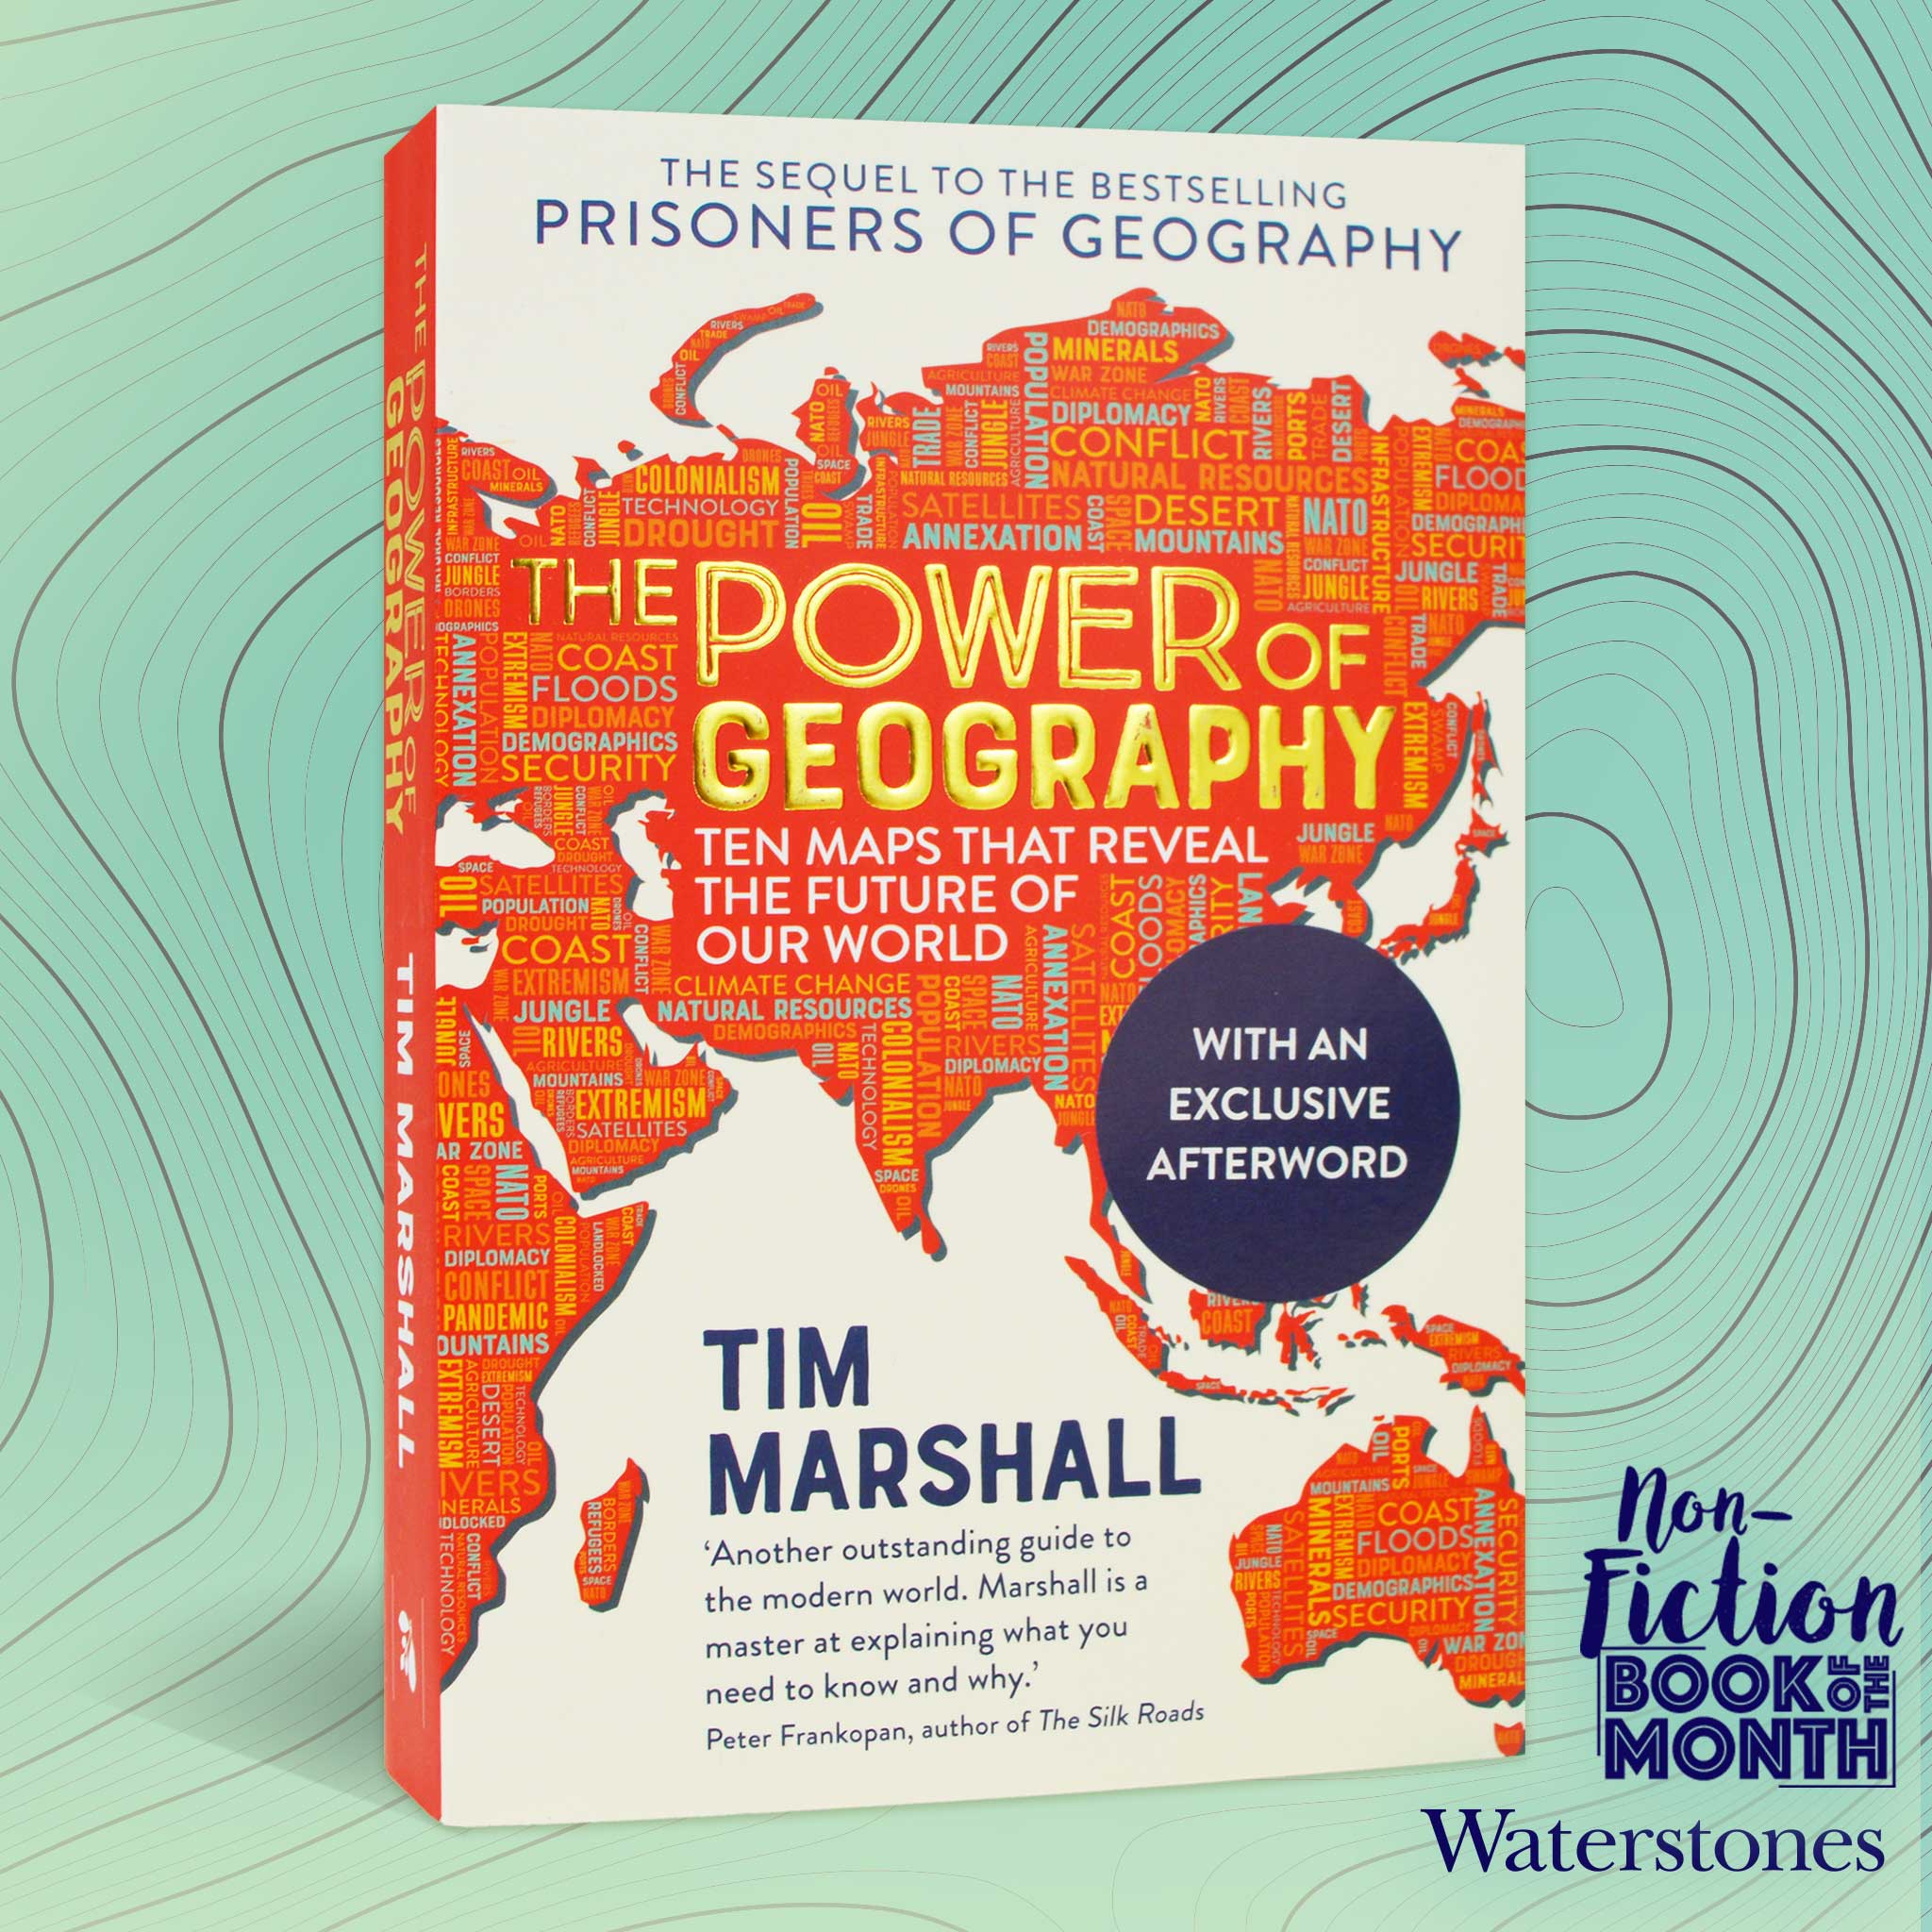 Elliott & Thompson  Power of Geography: paperback of the year 2021